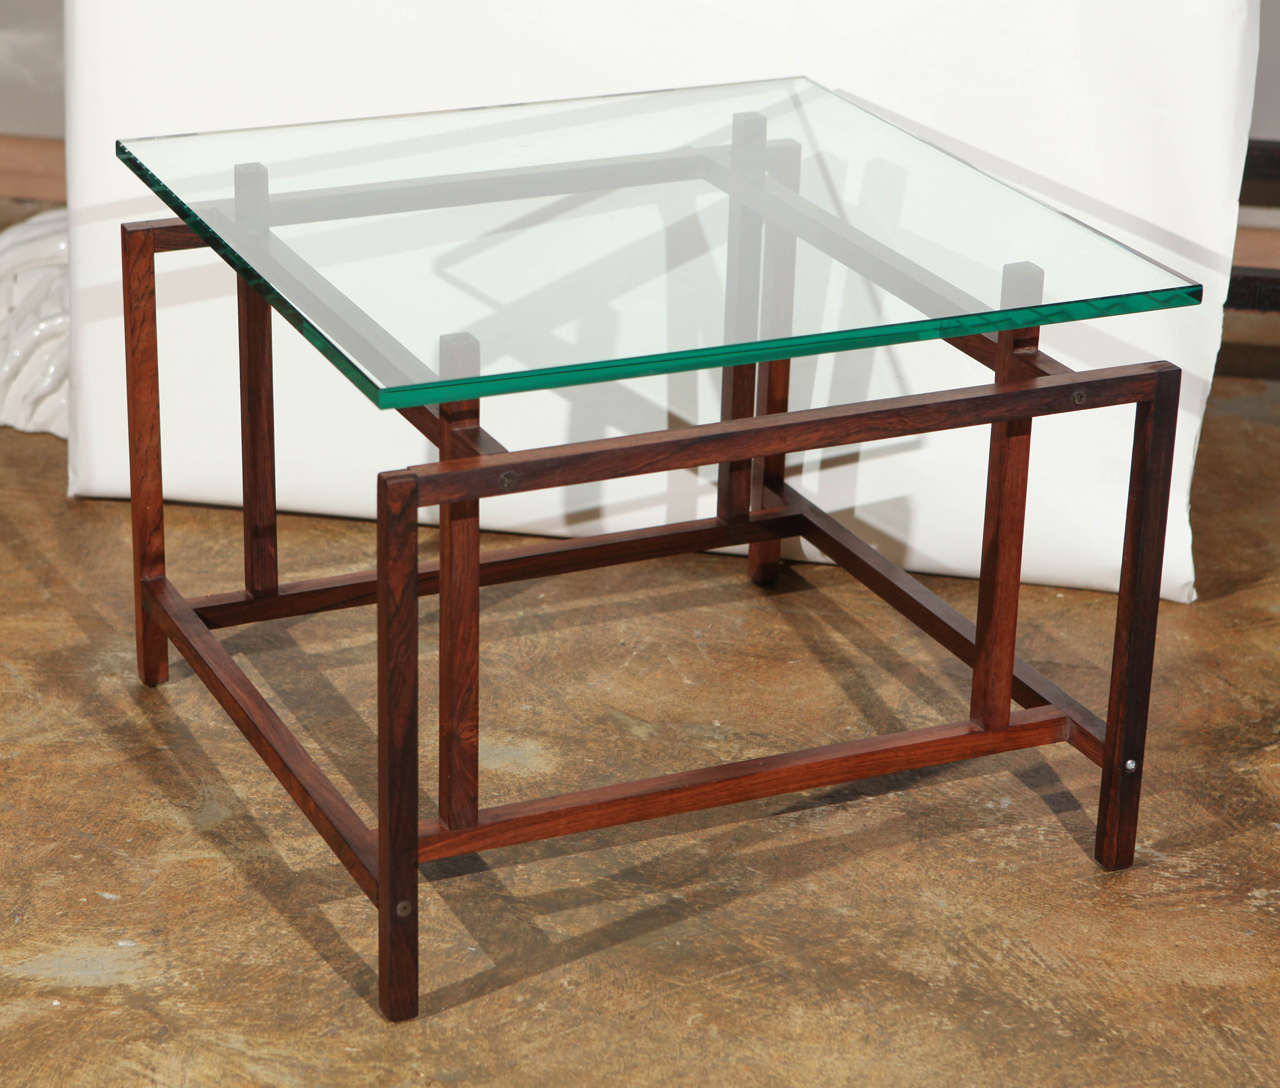 Mid-Century Danish Rosewood side table by Henning Norgaard for Komfort, Denmark. New glass. There are no pegs that the glass sits on. The glass sits directly on the top as shown. 
